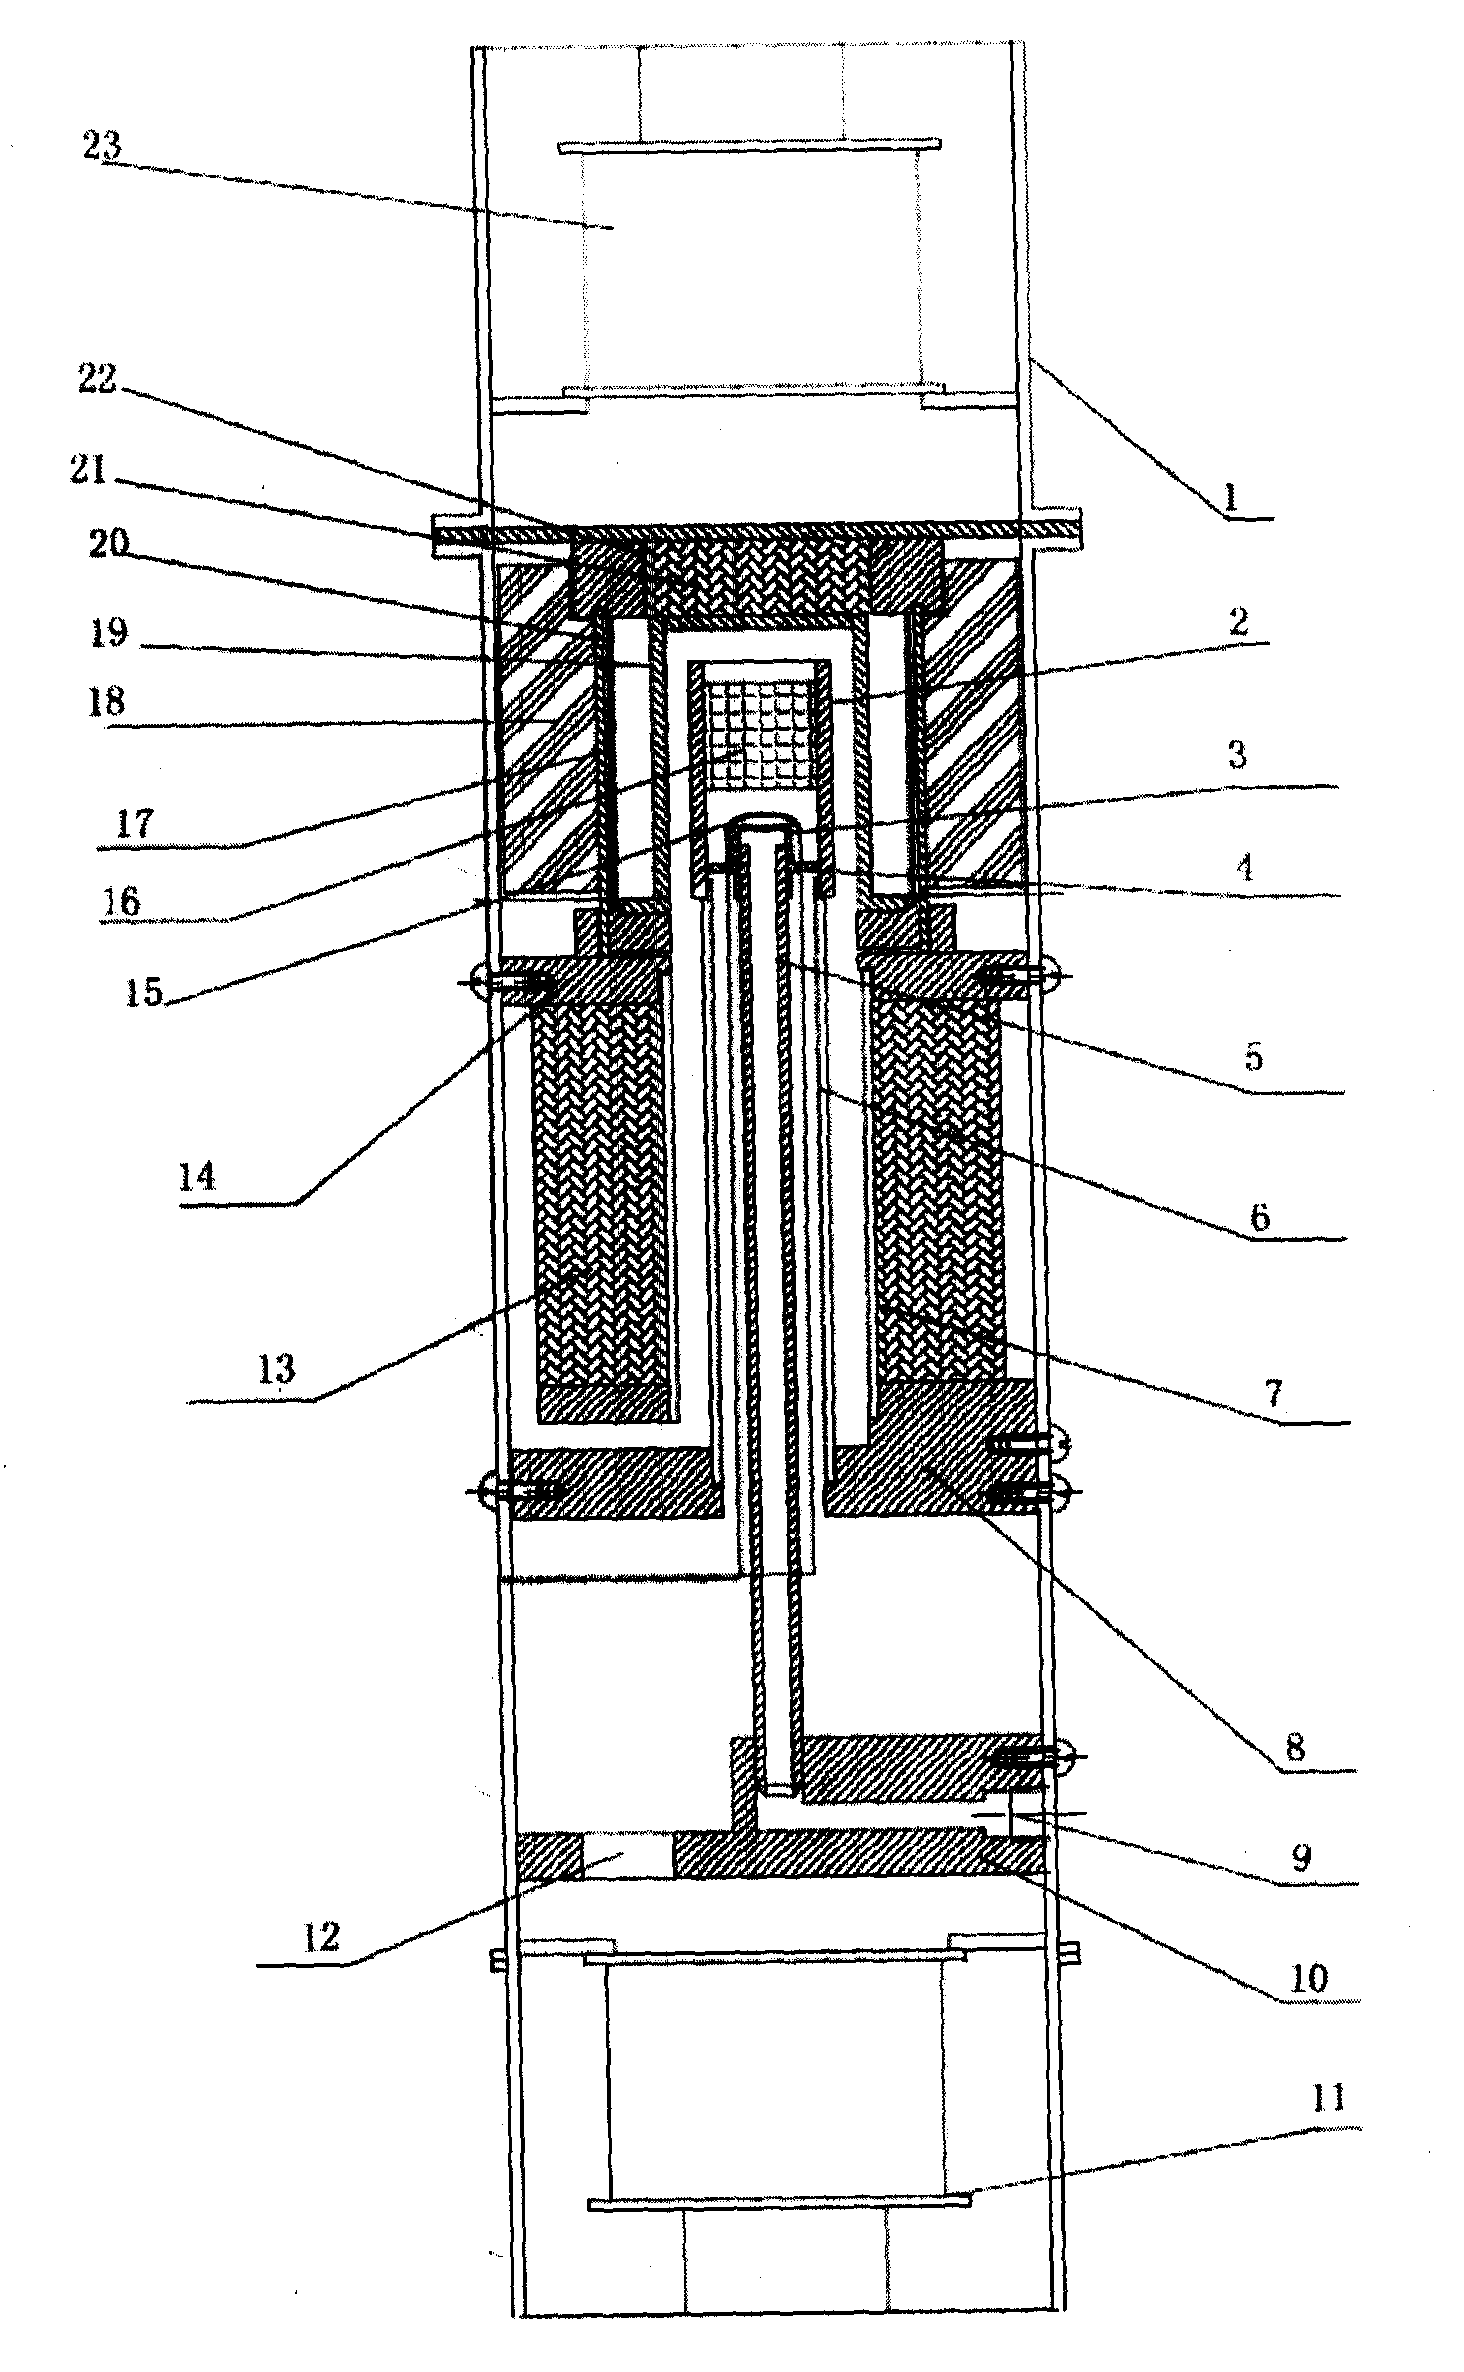 Thermo-photovoltaic direct conversion power generating device